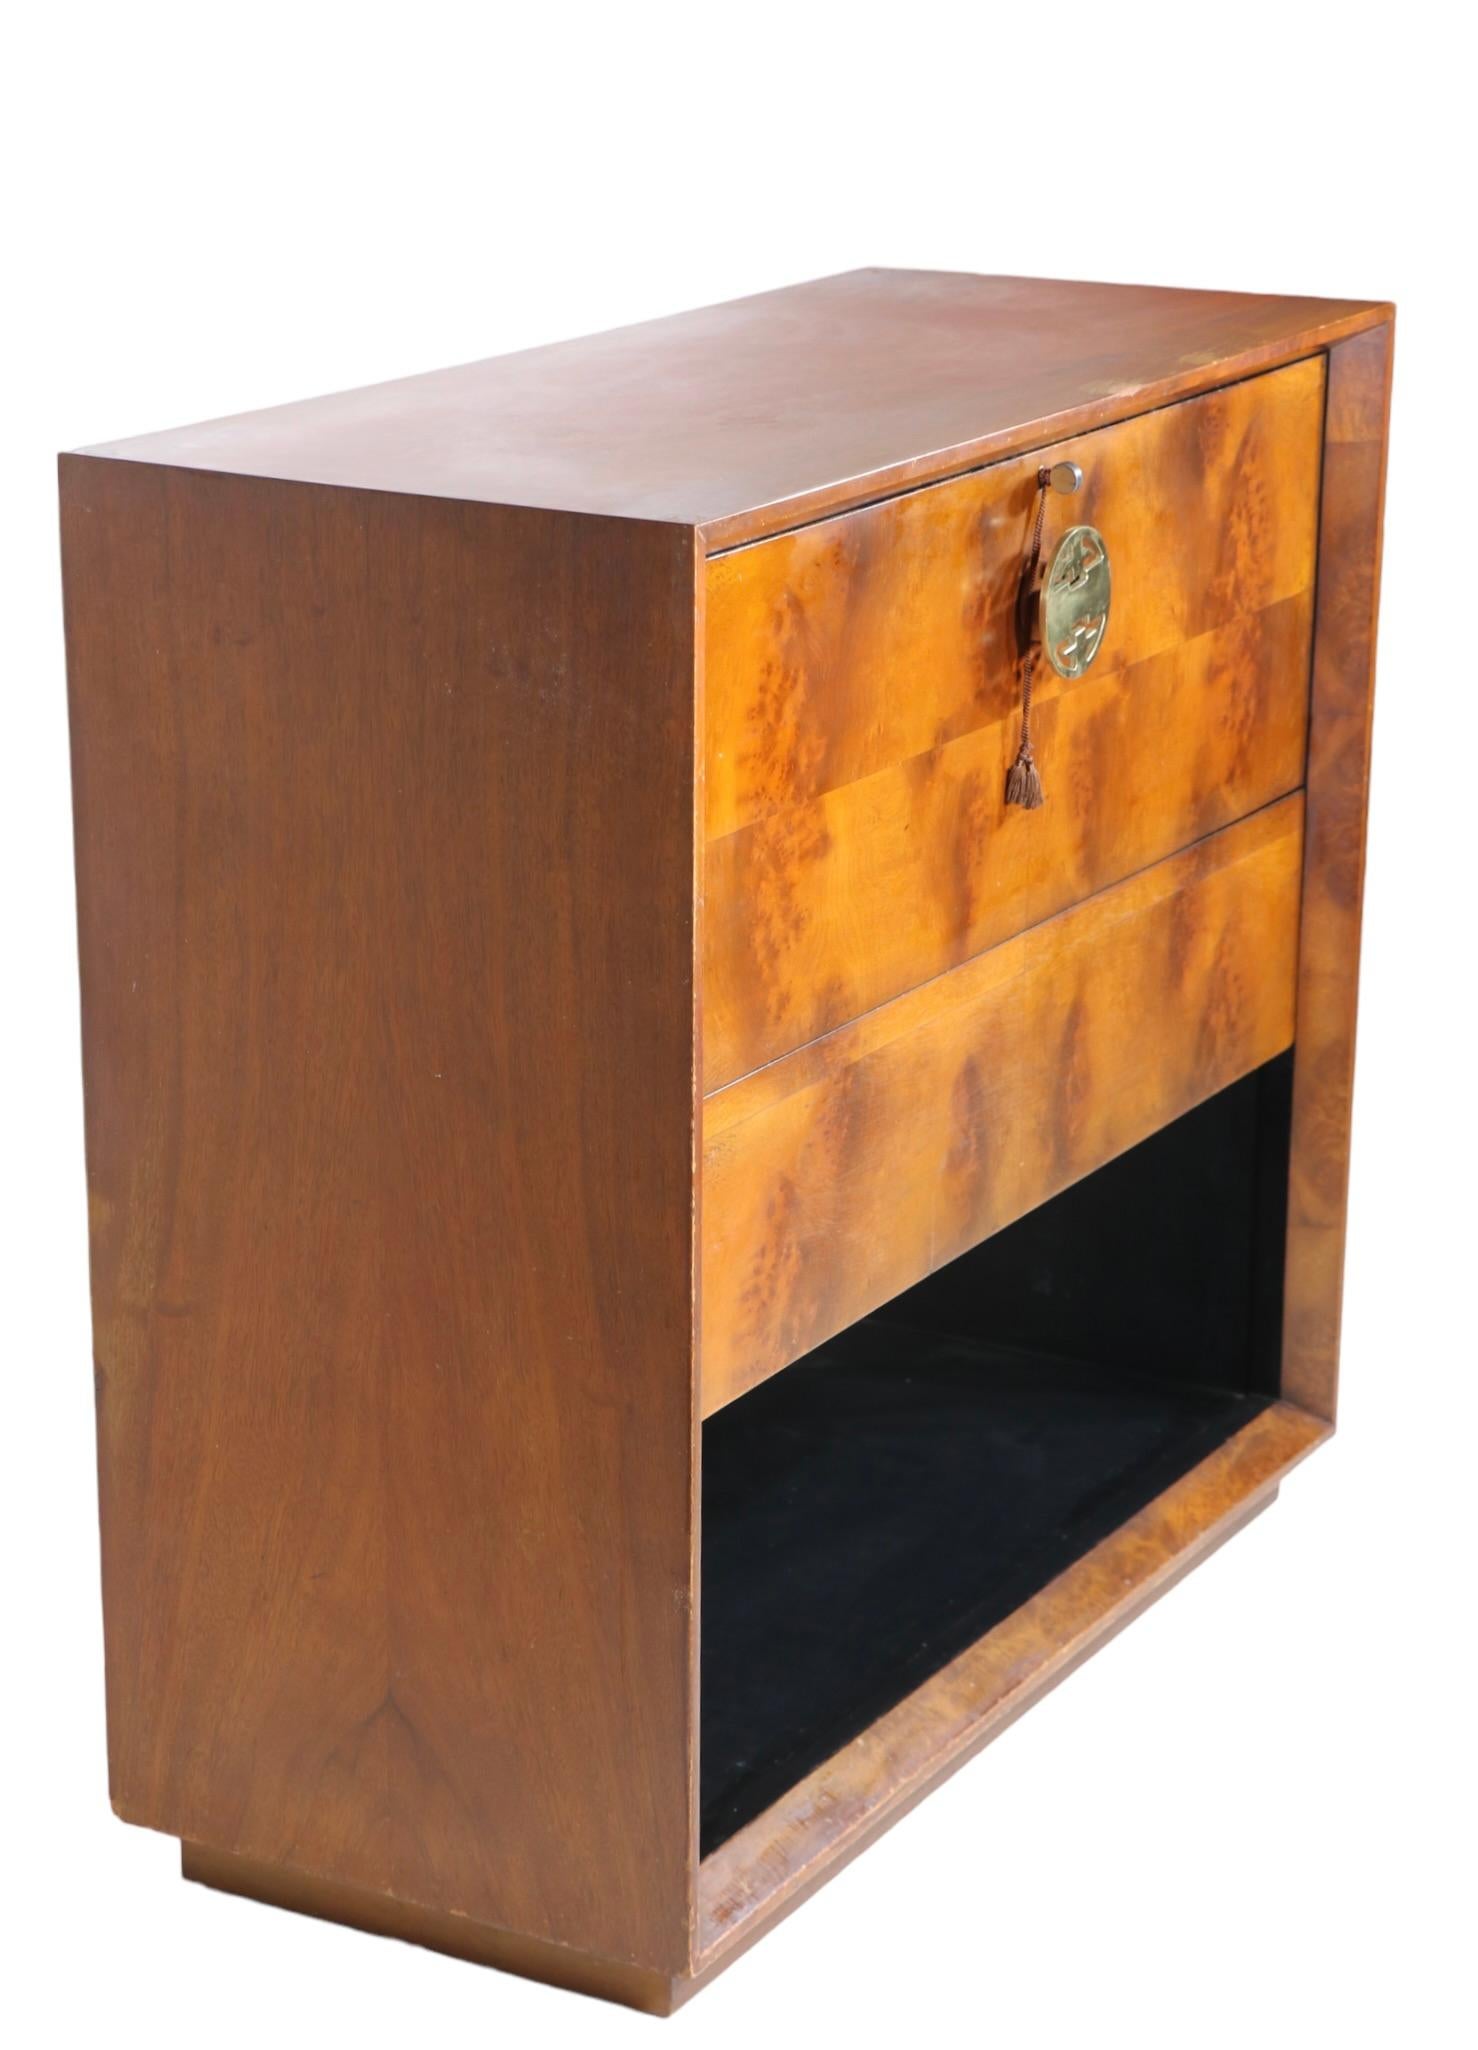 Art Deco Palladio Fall Front Desk by Gilbert Rohde for Herman Miller c. 1940’s For Sale 9